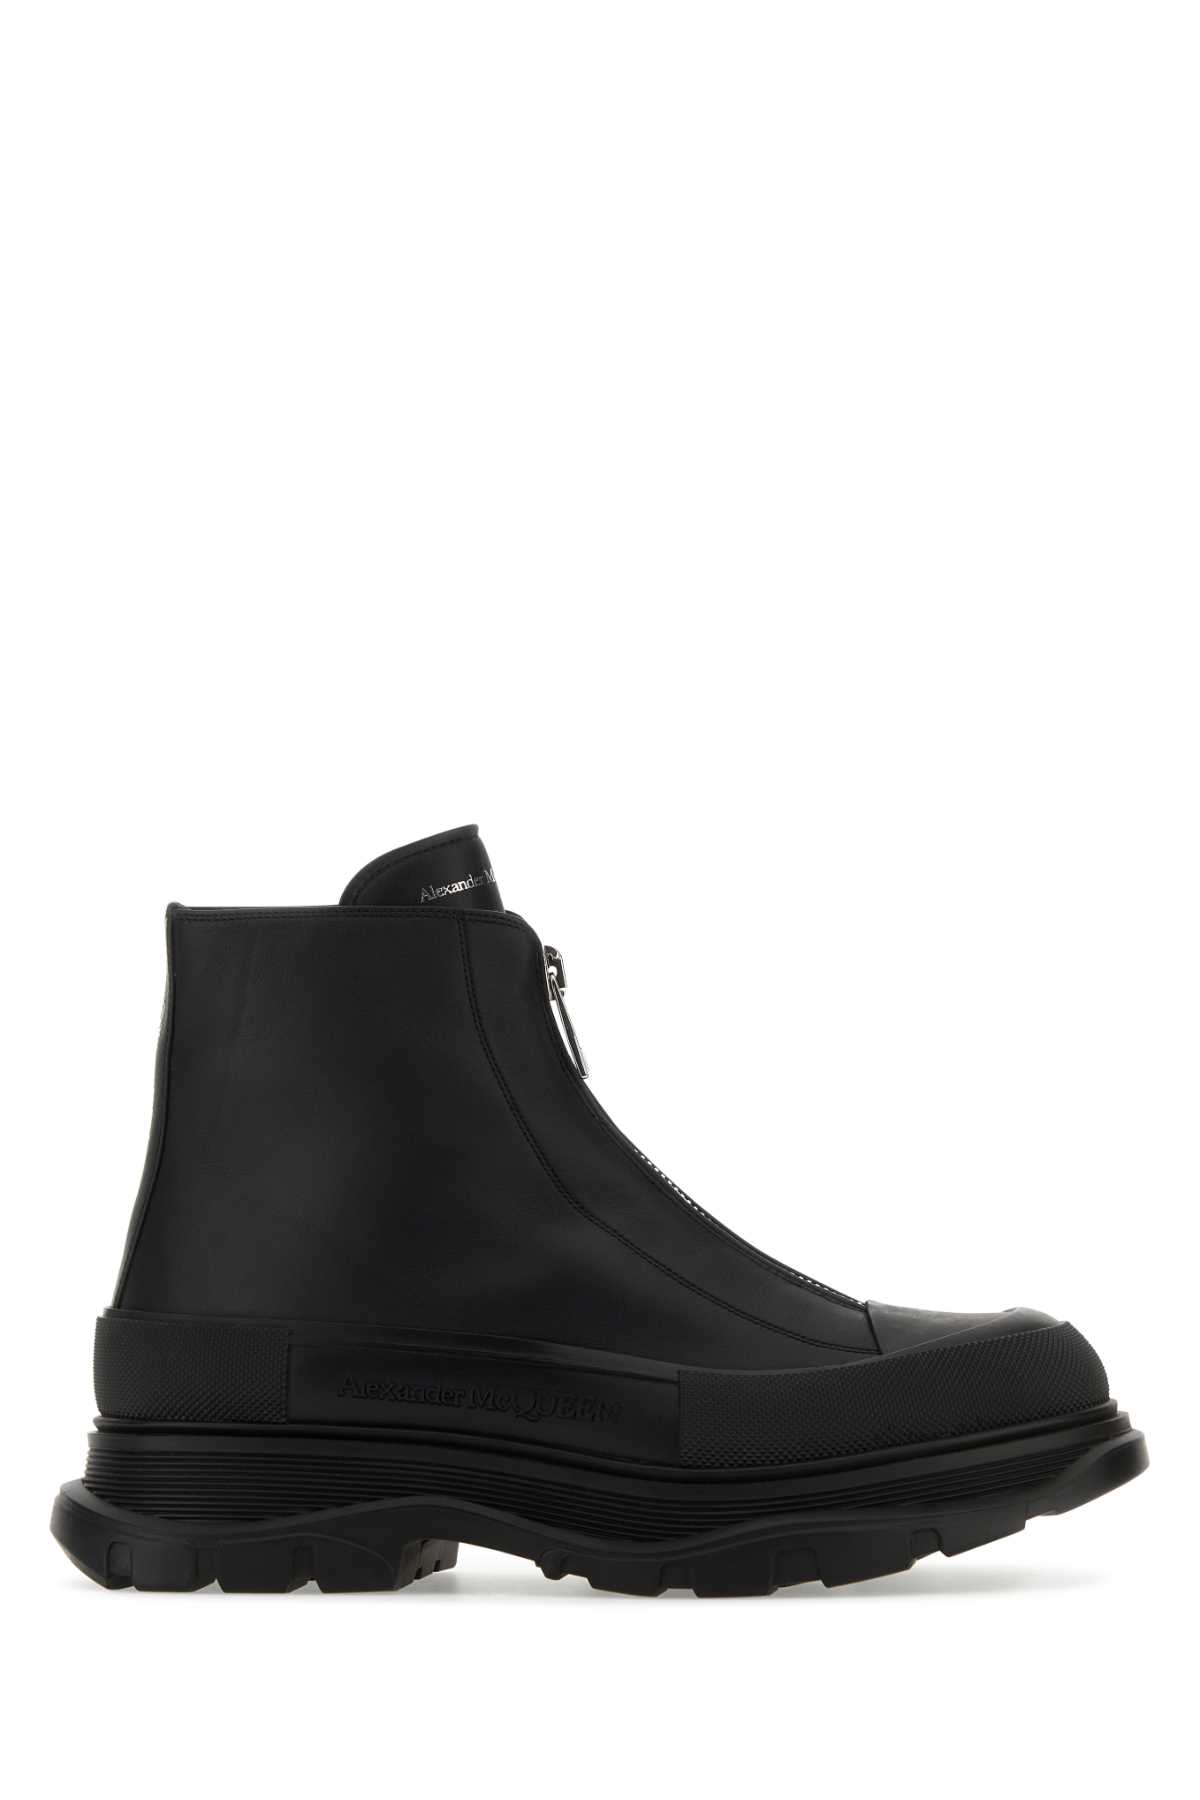 Alexander Mcqueen Black Leather Ankle Boots In Black/black